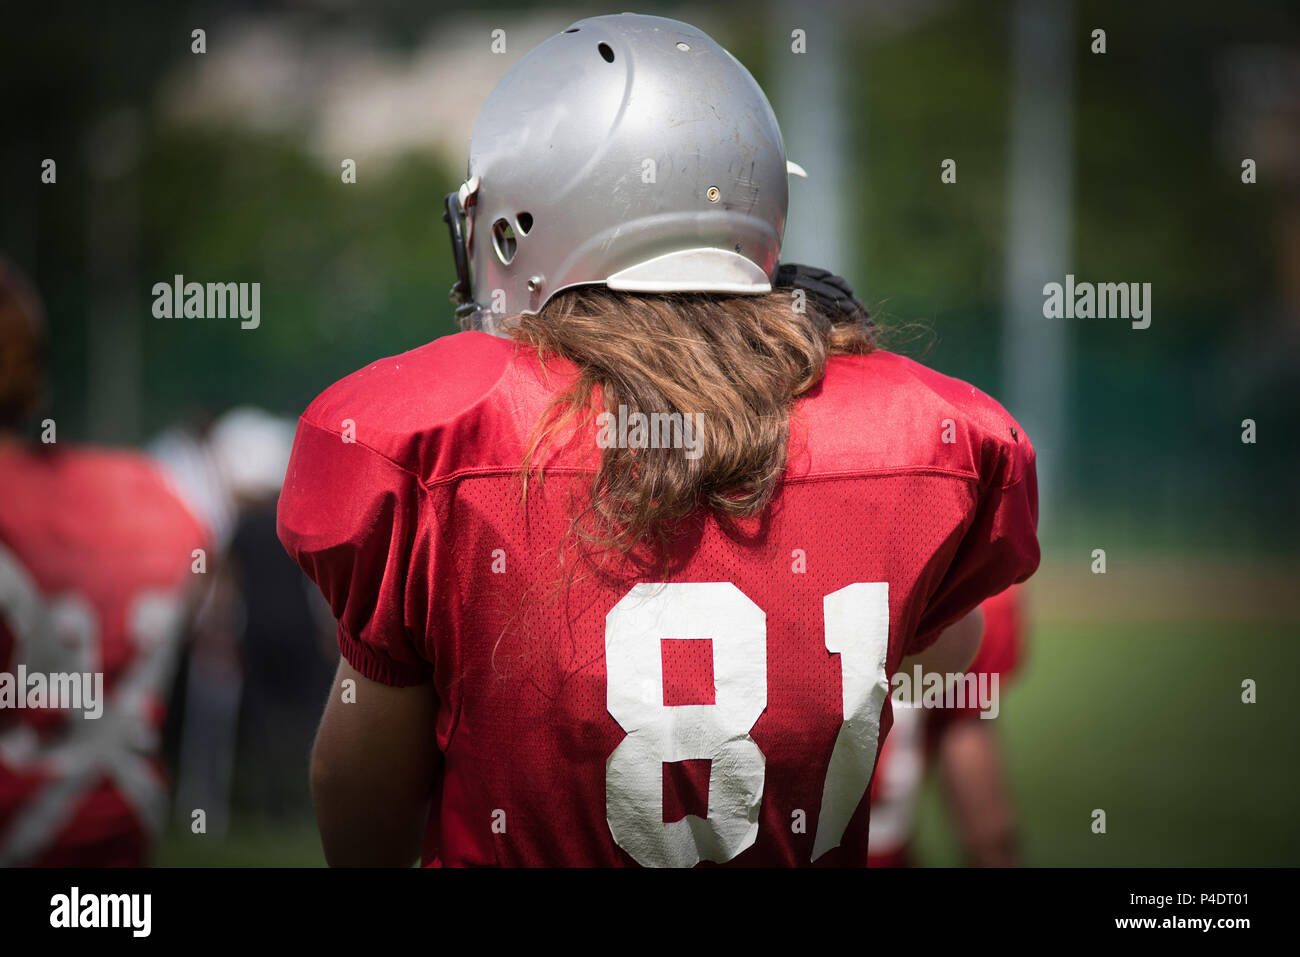 Vignette image of an American Football player in action Stock Photo